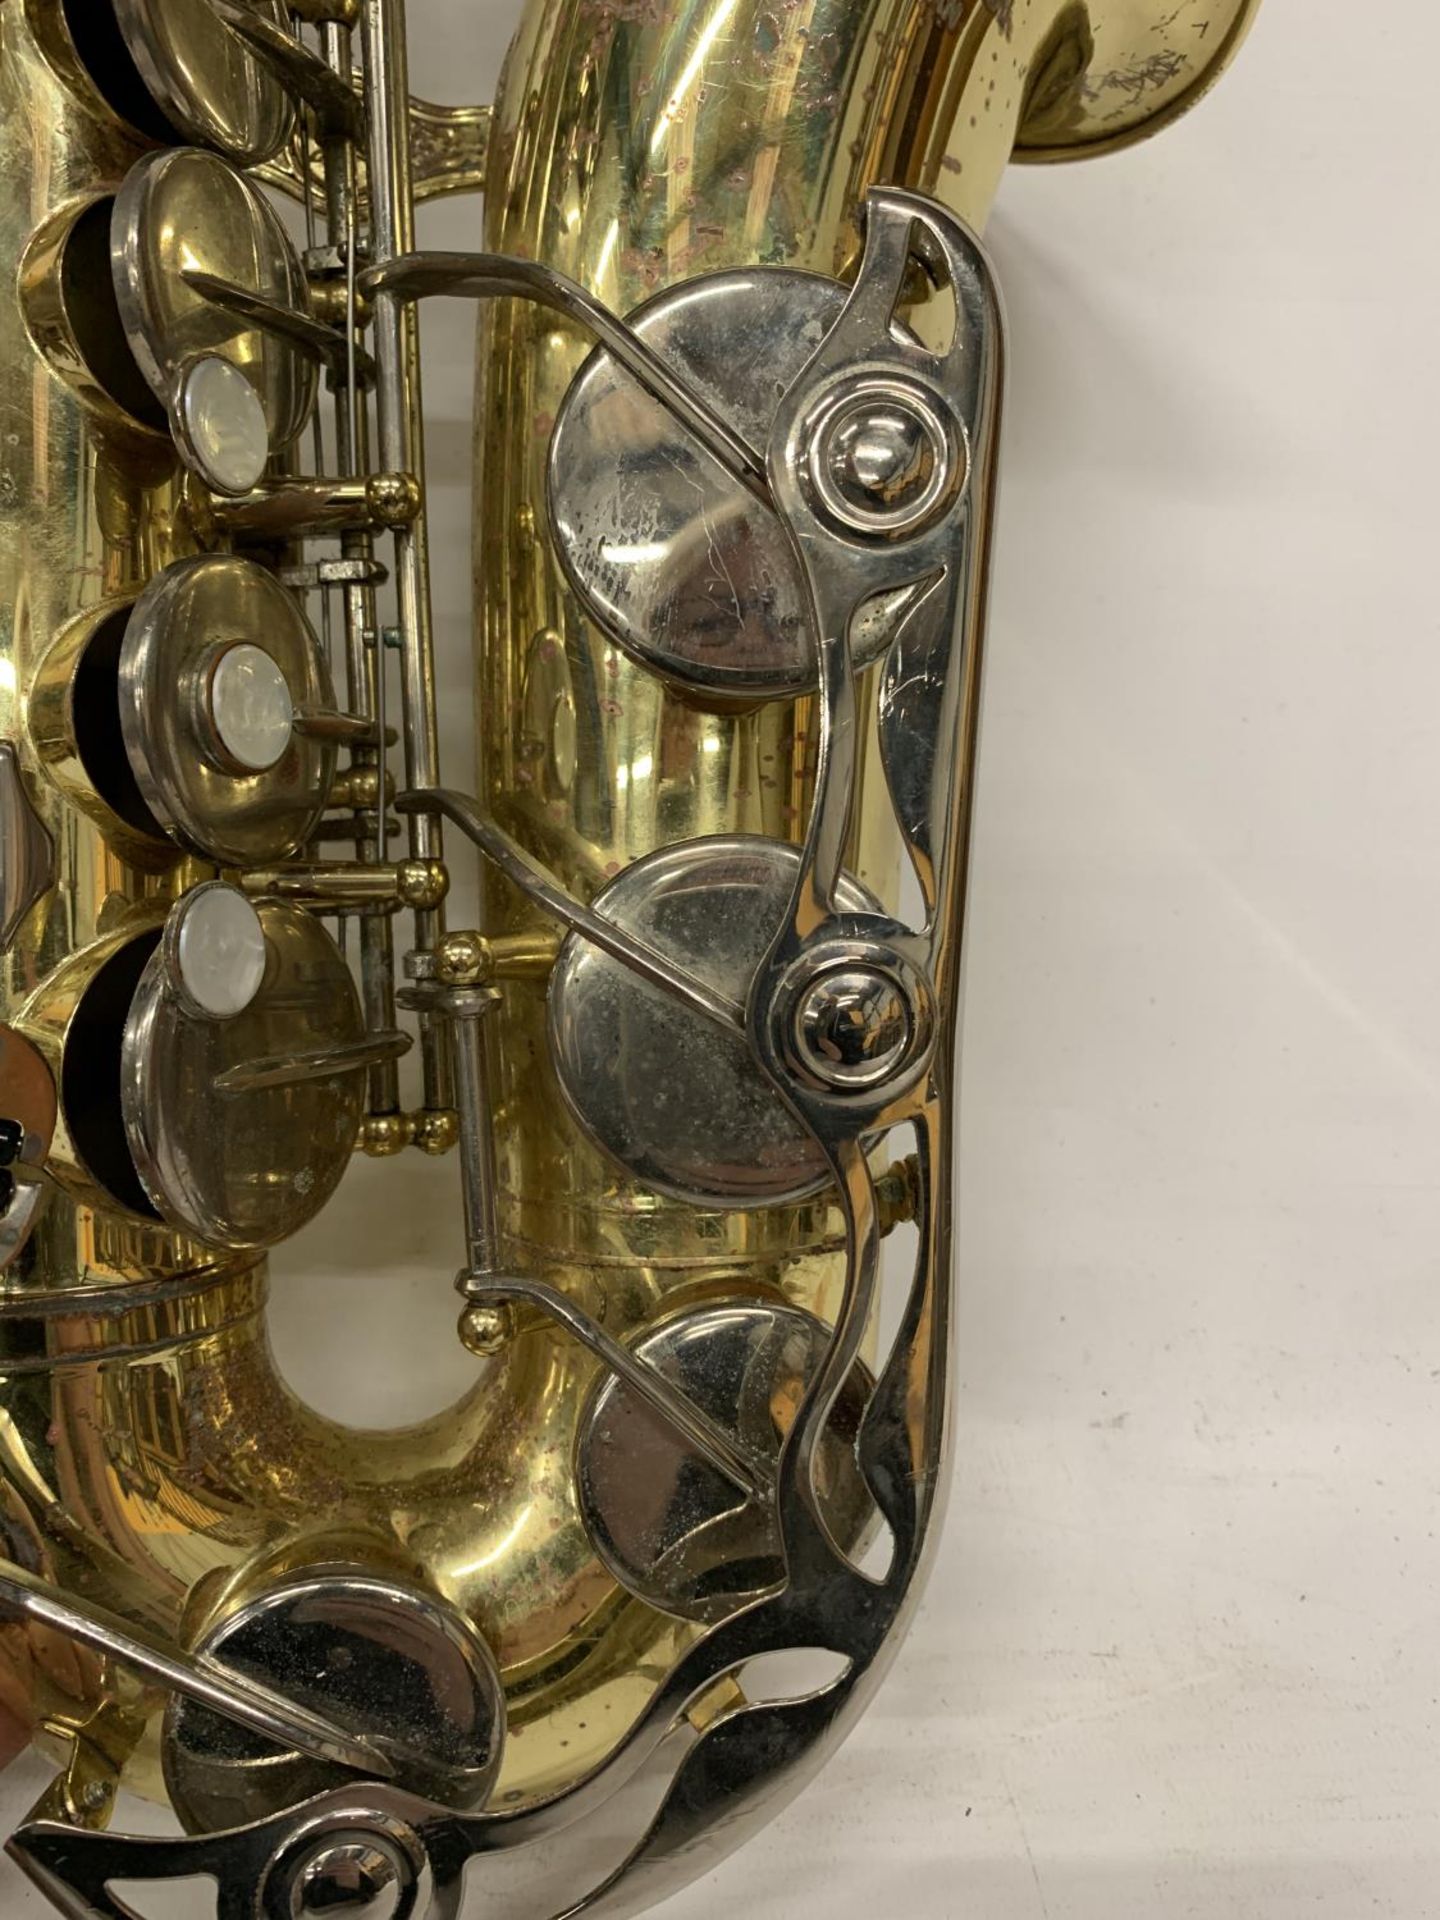 A YAMAHA SAXOPHONE WITH CASE AND A TEACHING BOOK - Image 12 of 24